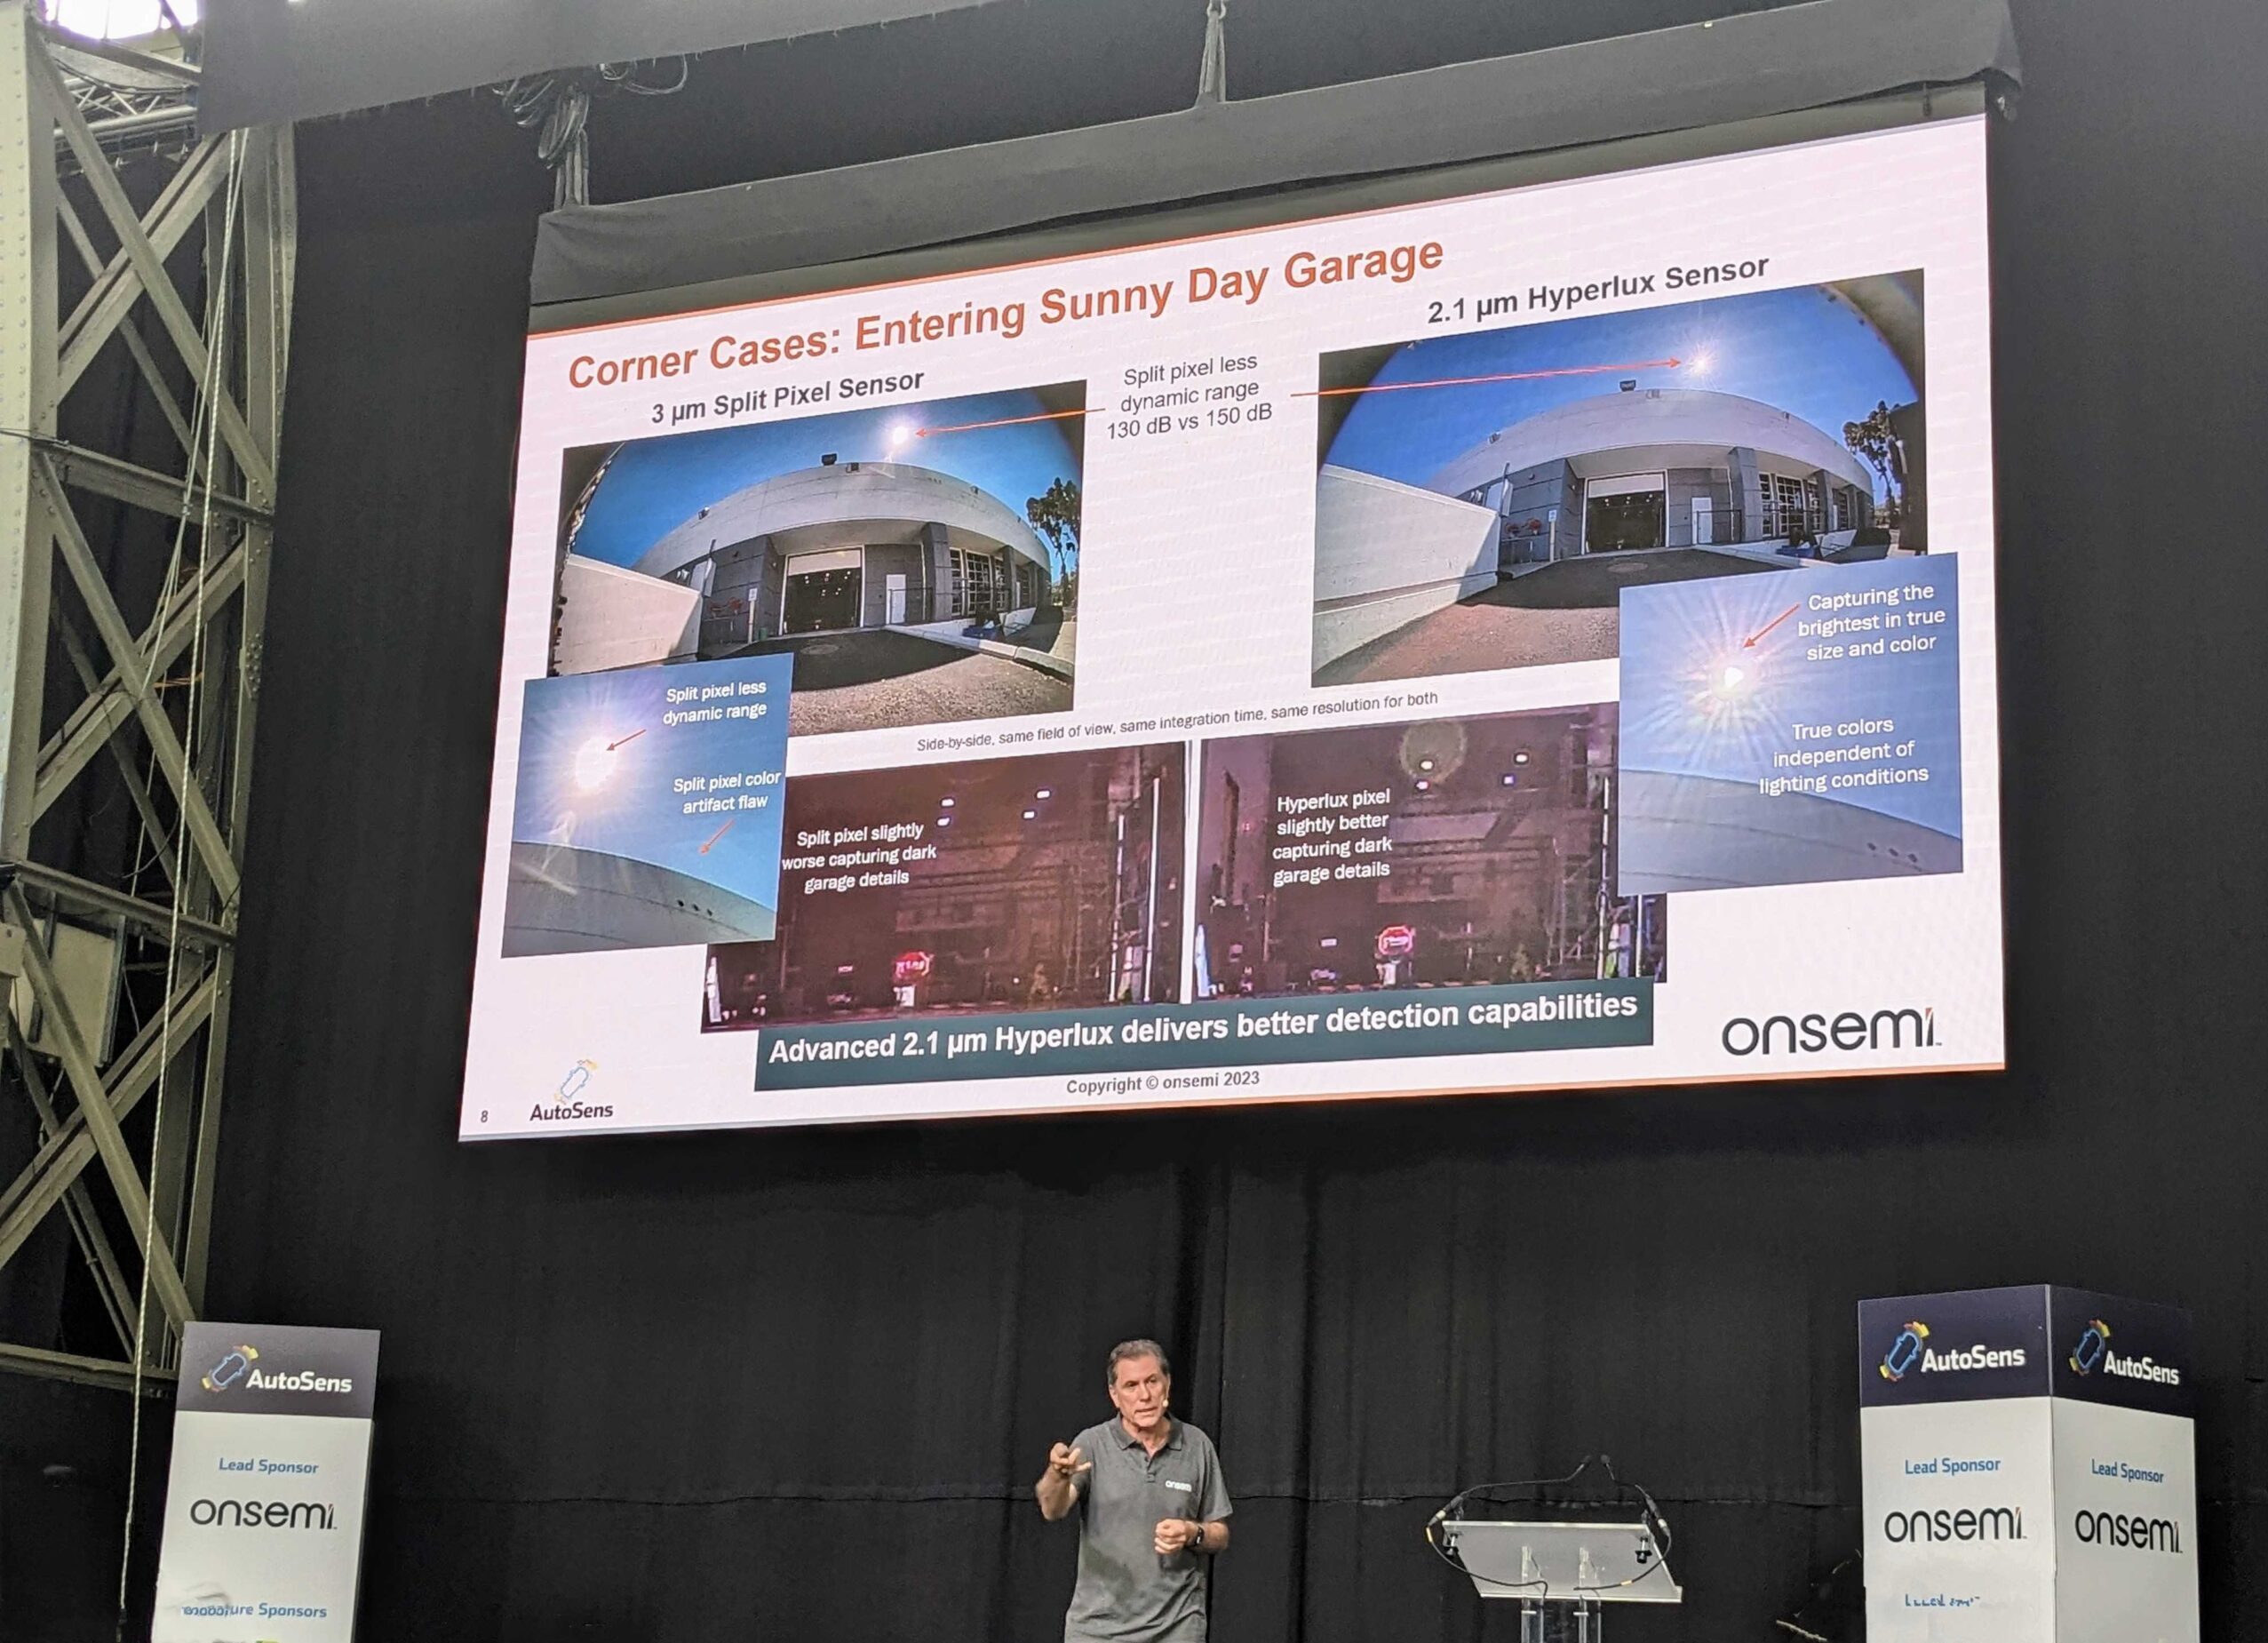 Sergey Velichko, Senior Manager, ASD Technology and Product Strategy at onsemi presents the benefits of 2.1 µm Hyperlux image sensors in coping with challenging corner cases